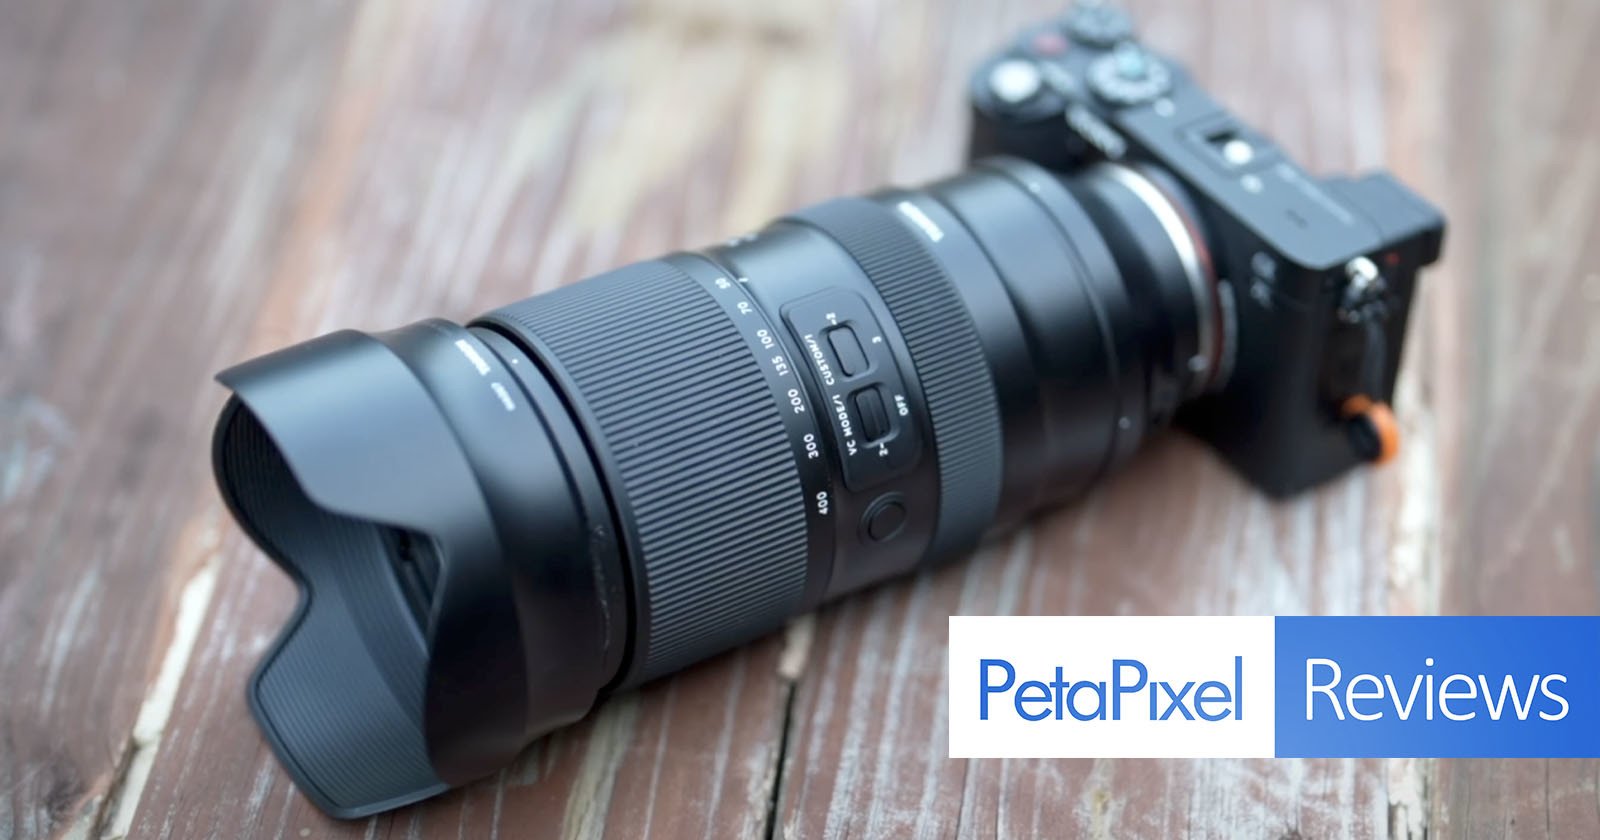 Tamron 50-400mm f/4.5-6.3 Di III Review: Not Your Average All-In-One